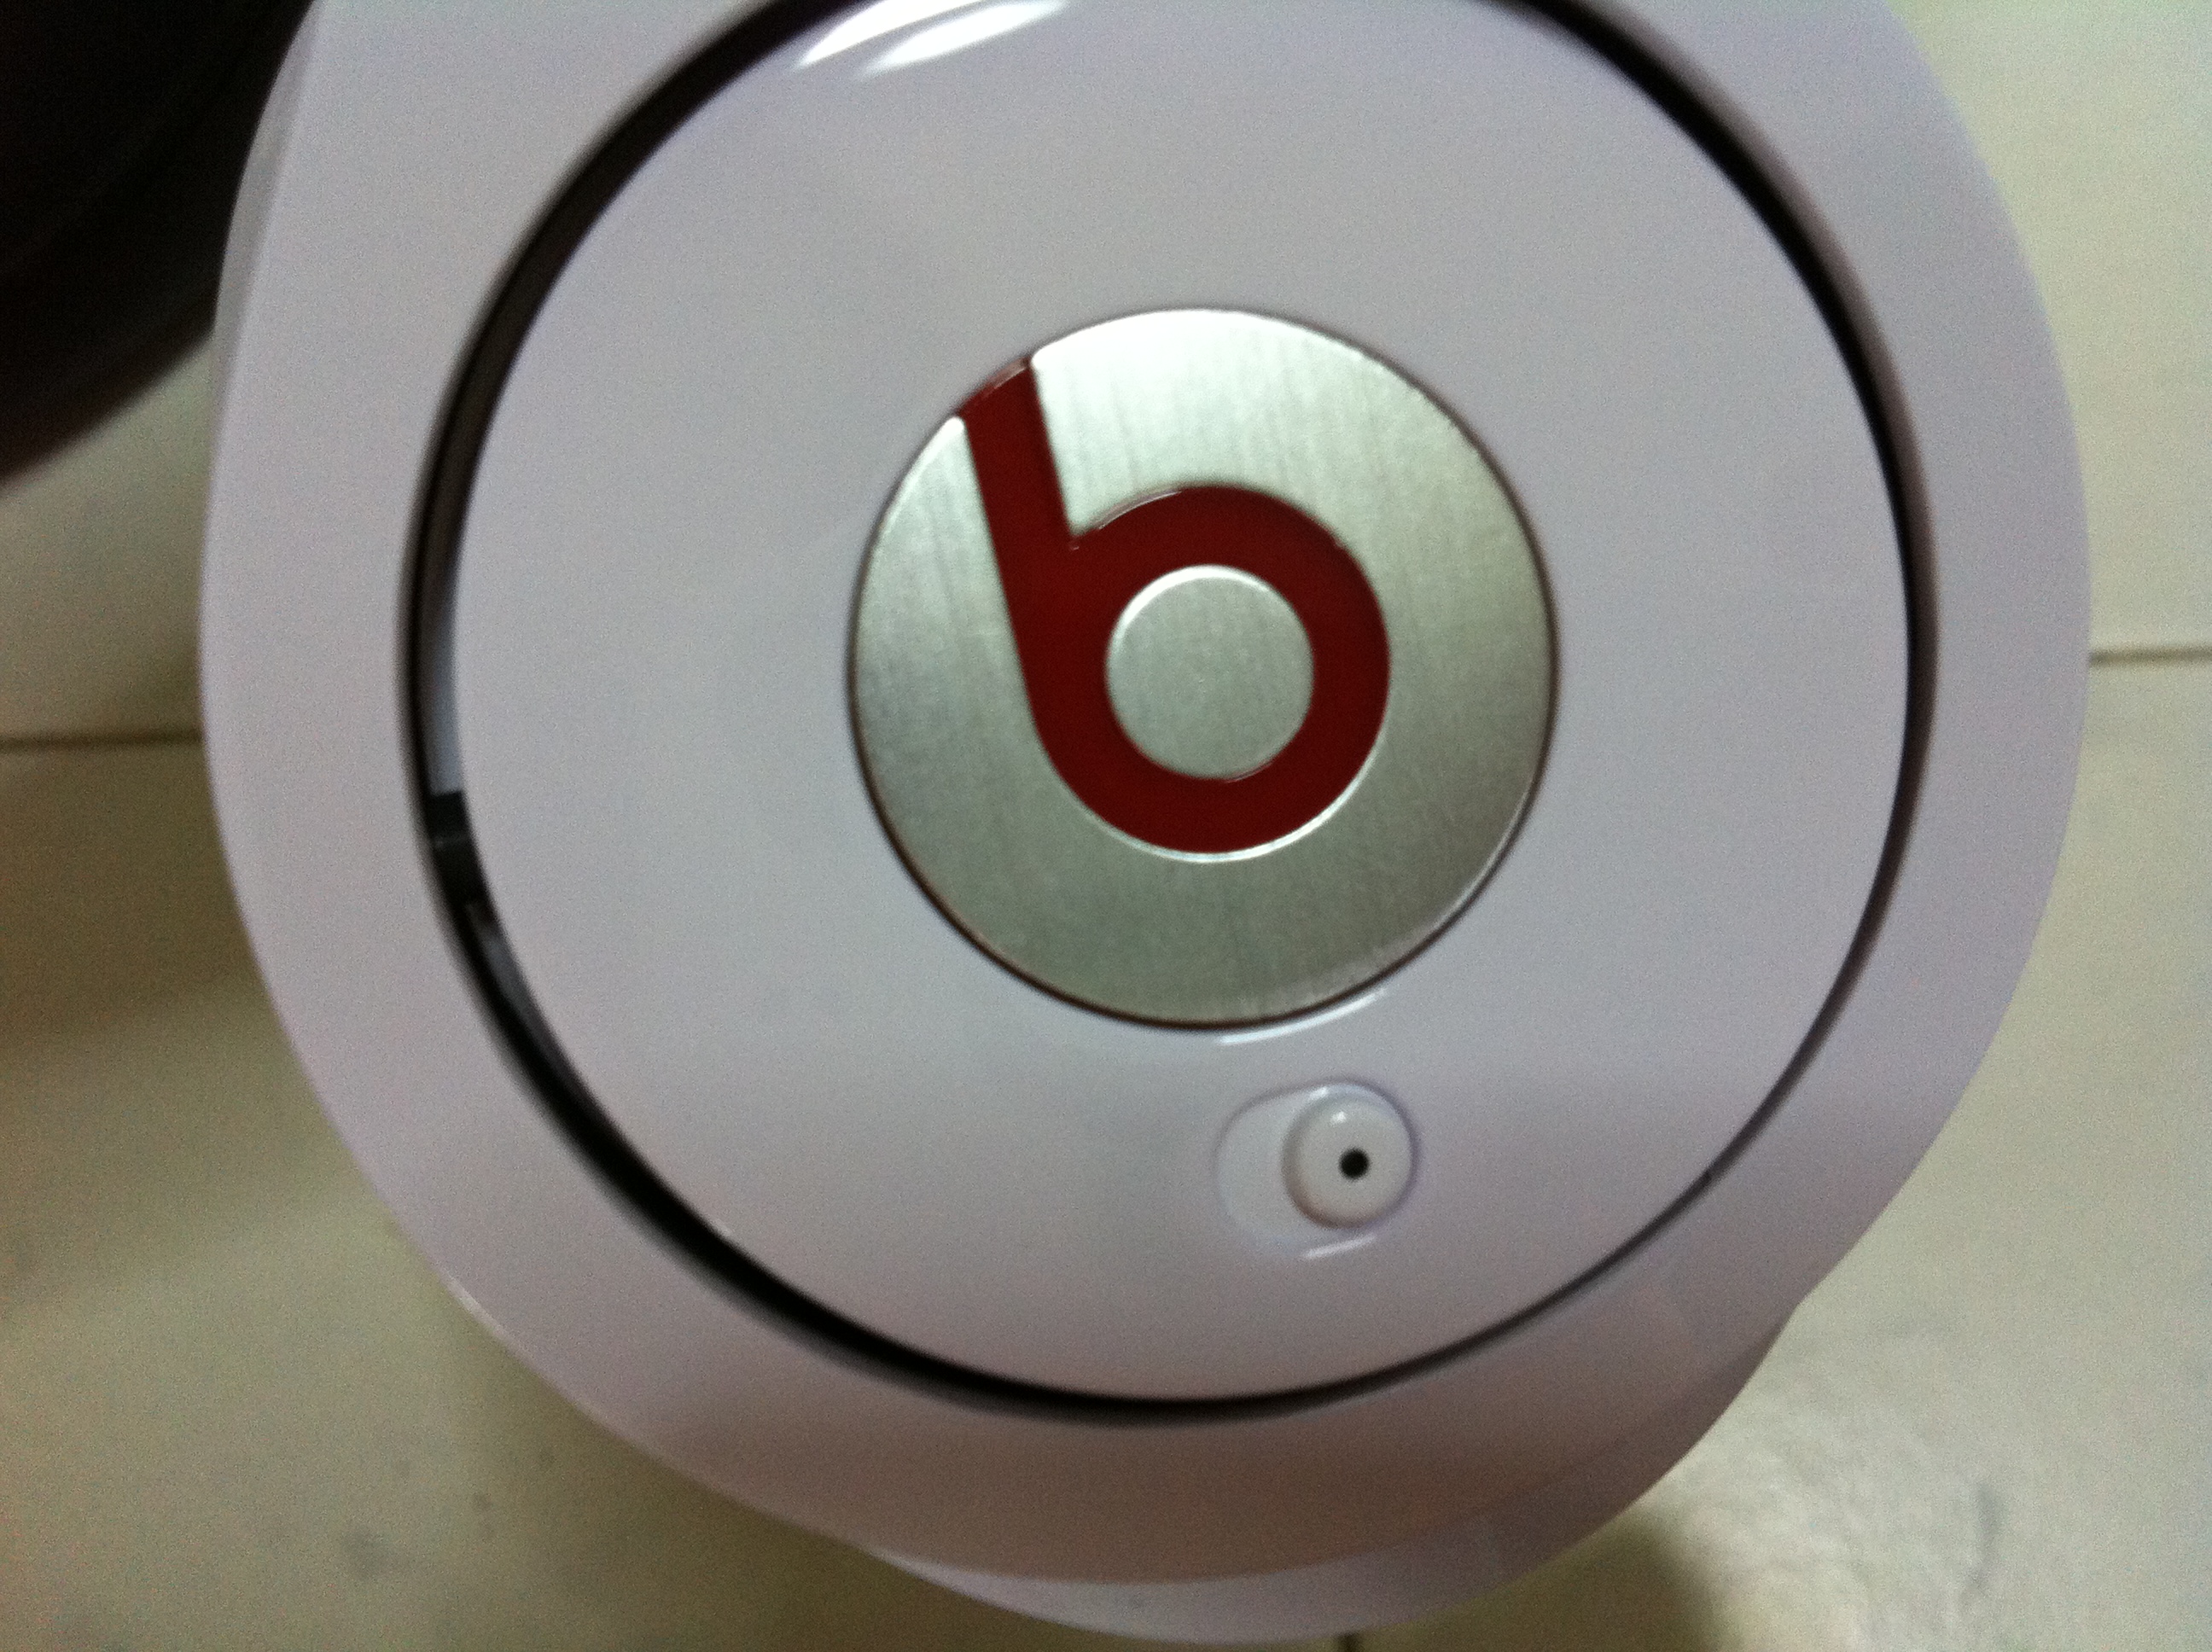 Why do Beats by Dre headphones require batteries? - Quora